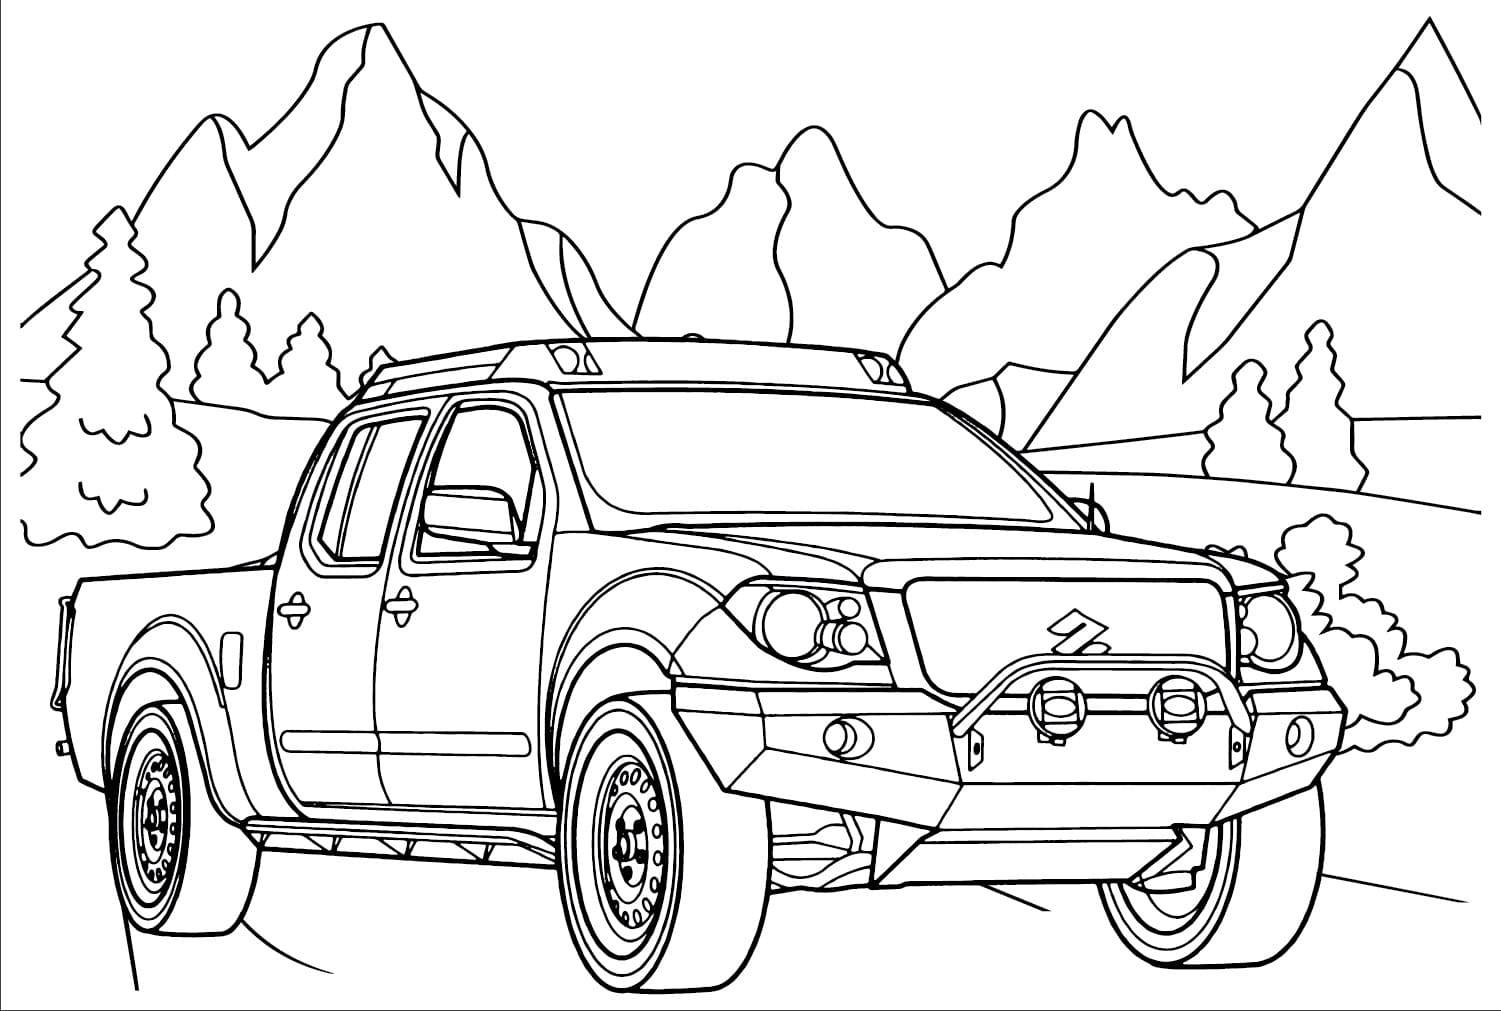 suzuki-car-free-coloring-page-download-print-or-color-online-for-free